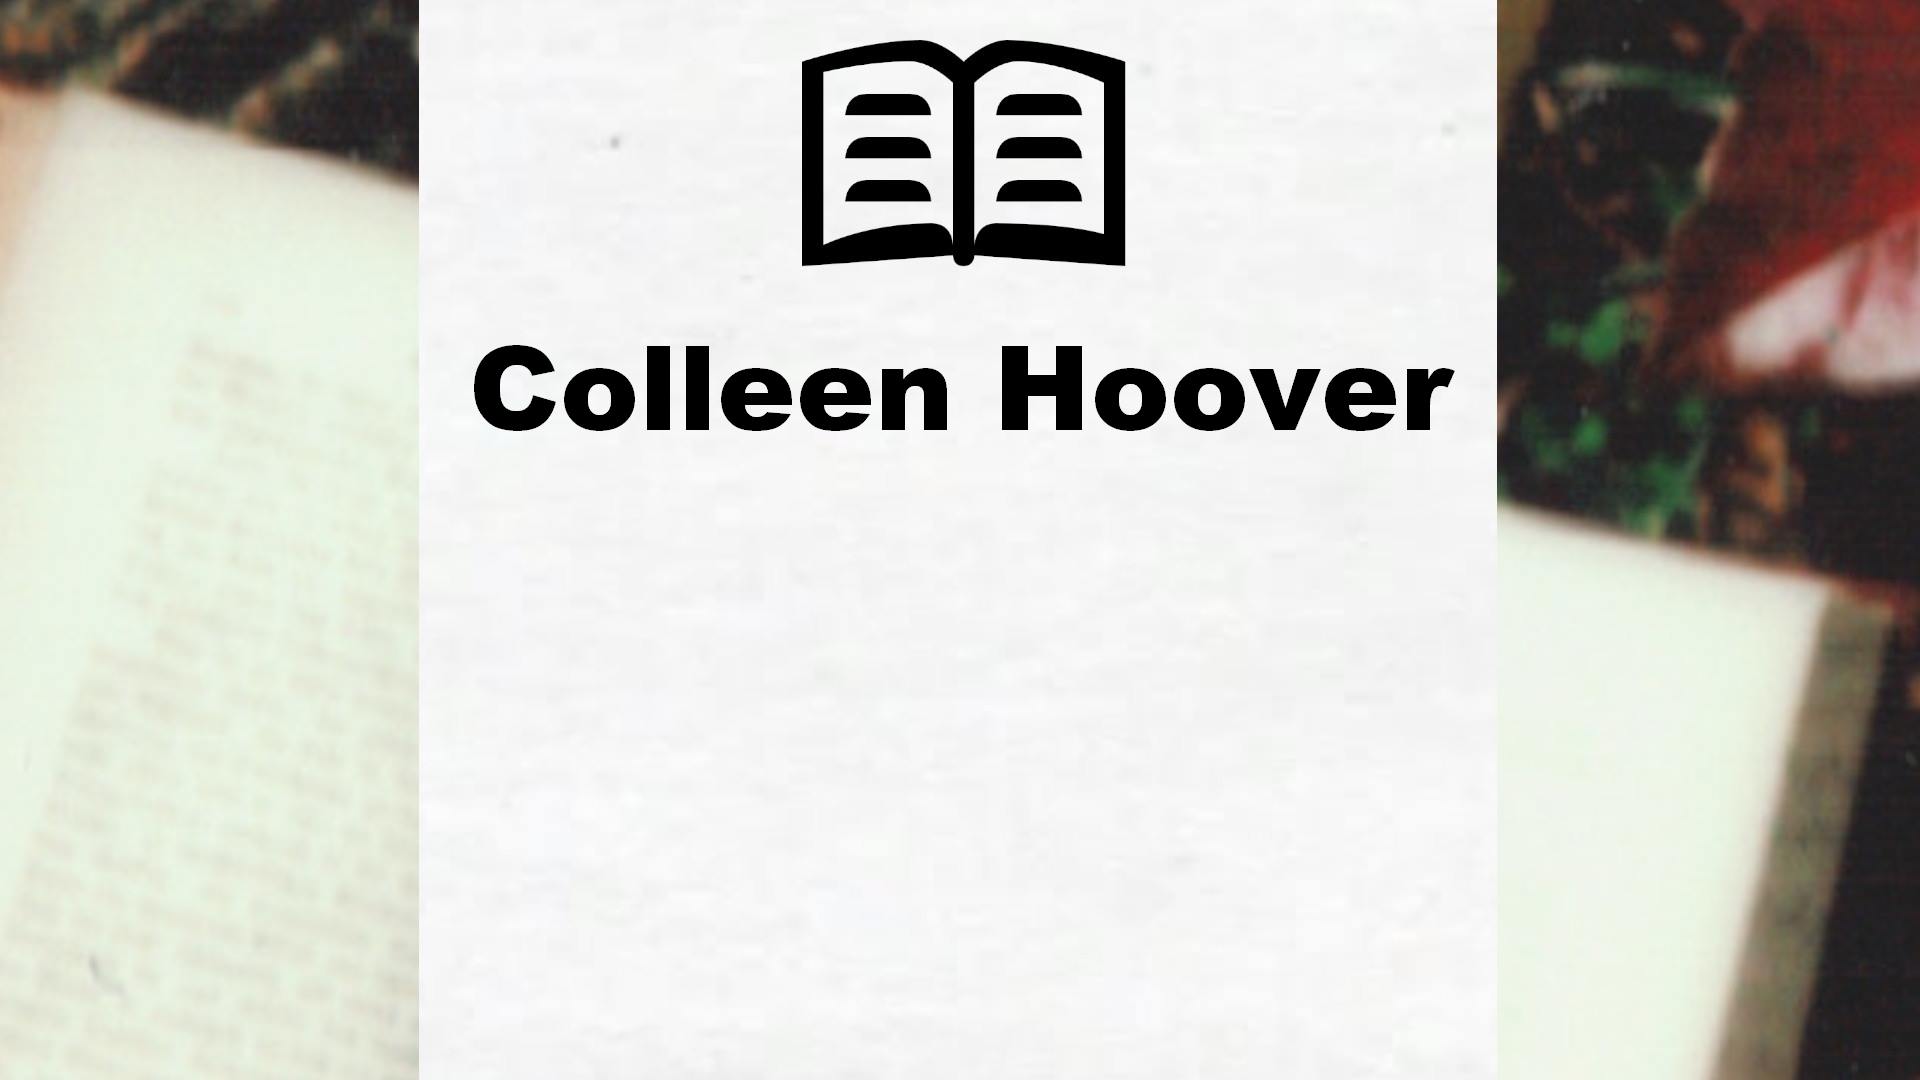 Generic Jamais plus : A Novel By Colleen Hoover - French edition à